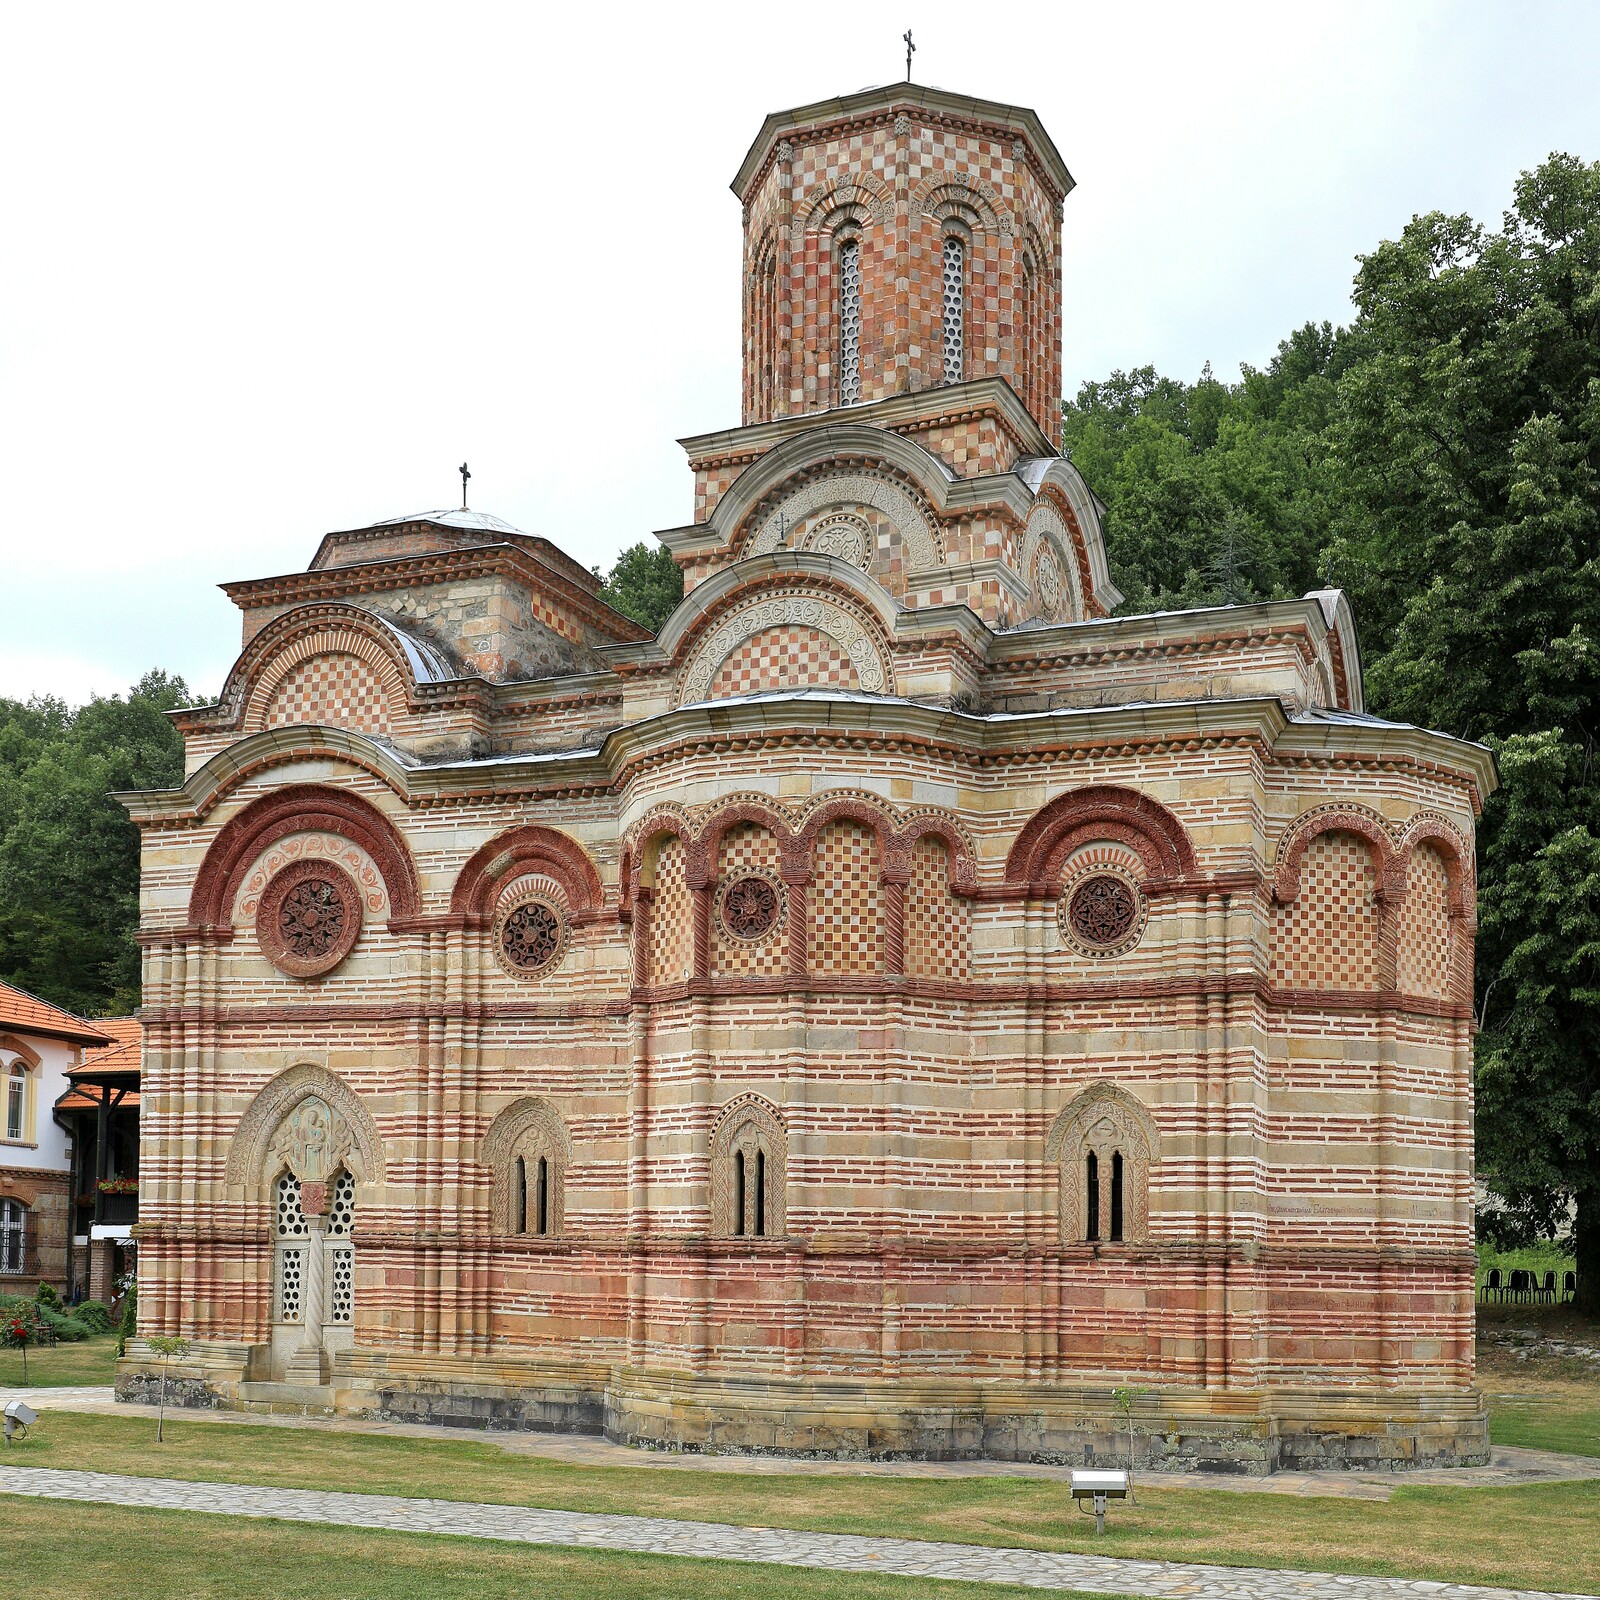 The Church of the Presentation of the Mother of God